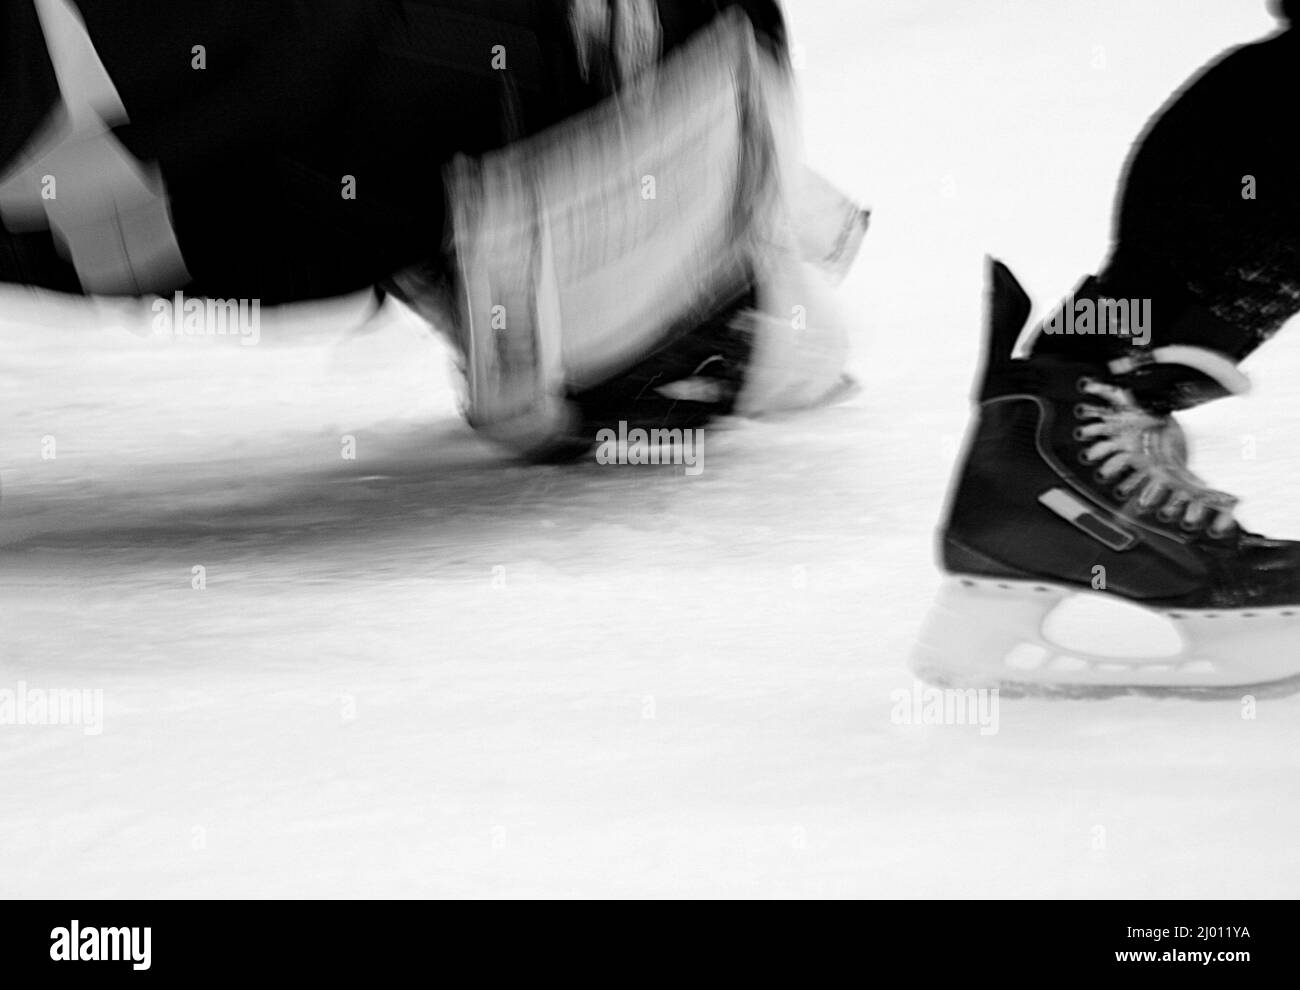 Close Up of Moving Goalie and Skater's Foot During Hockey Practice Stock Photo